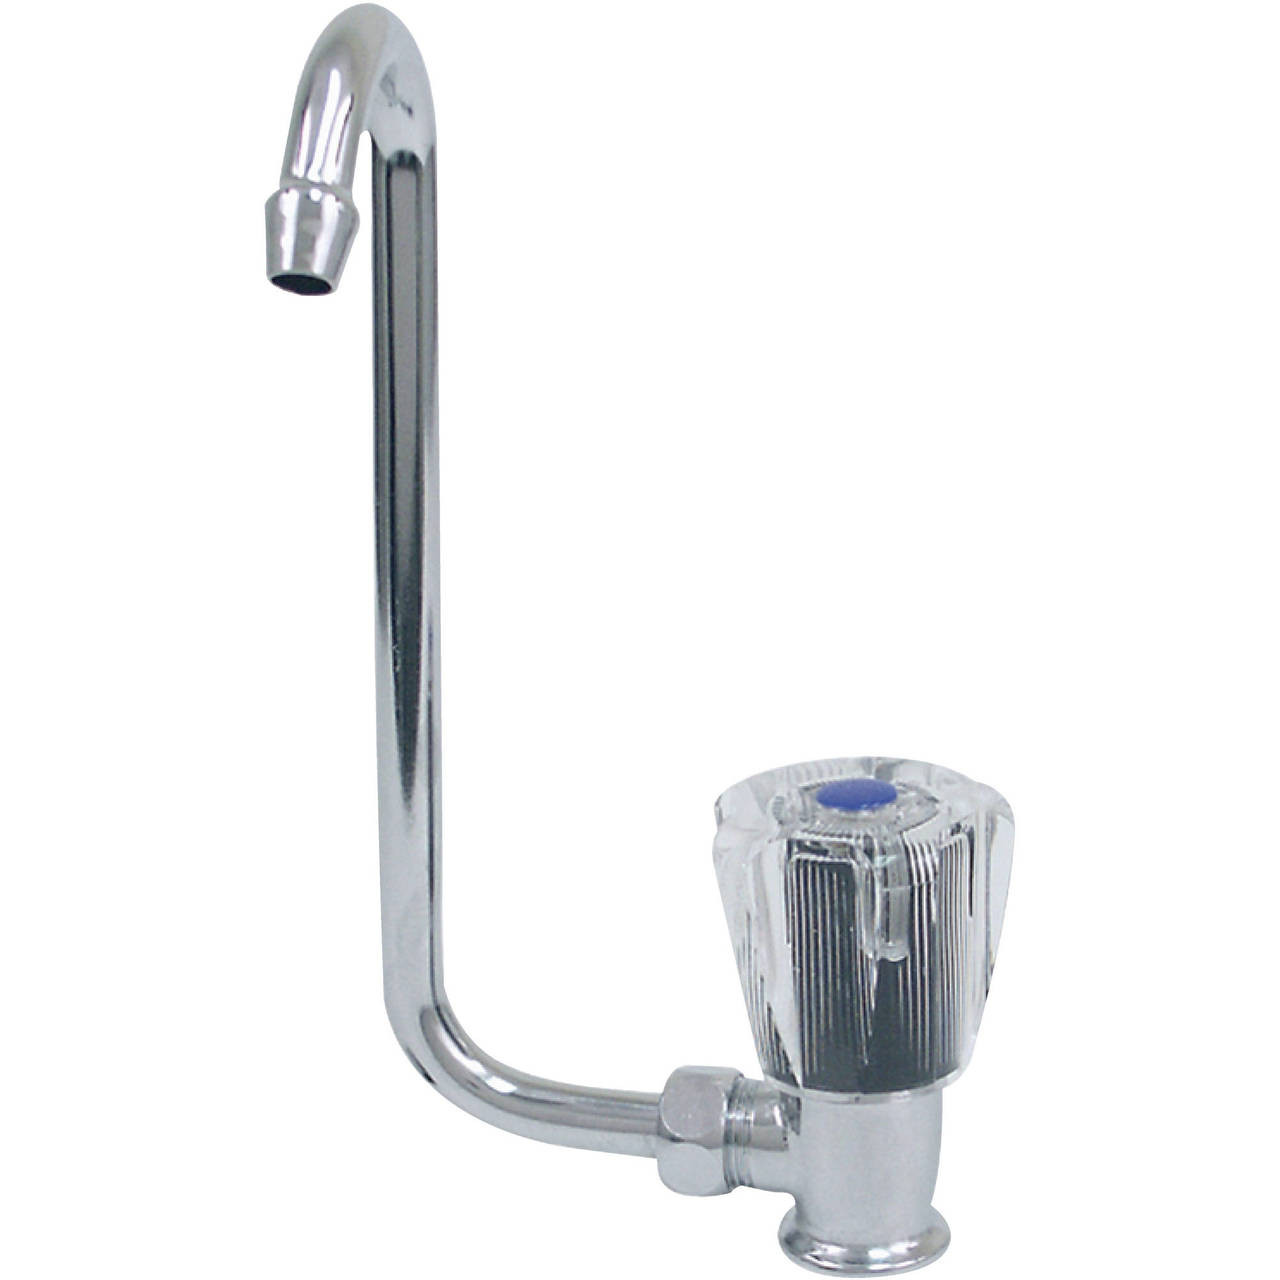 CHAPARAL FOLDING FAUCET 10089 *In Stock & Ready To Ship!